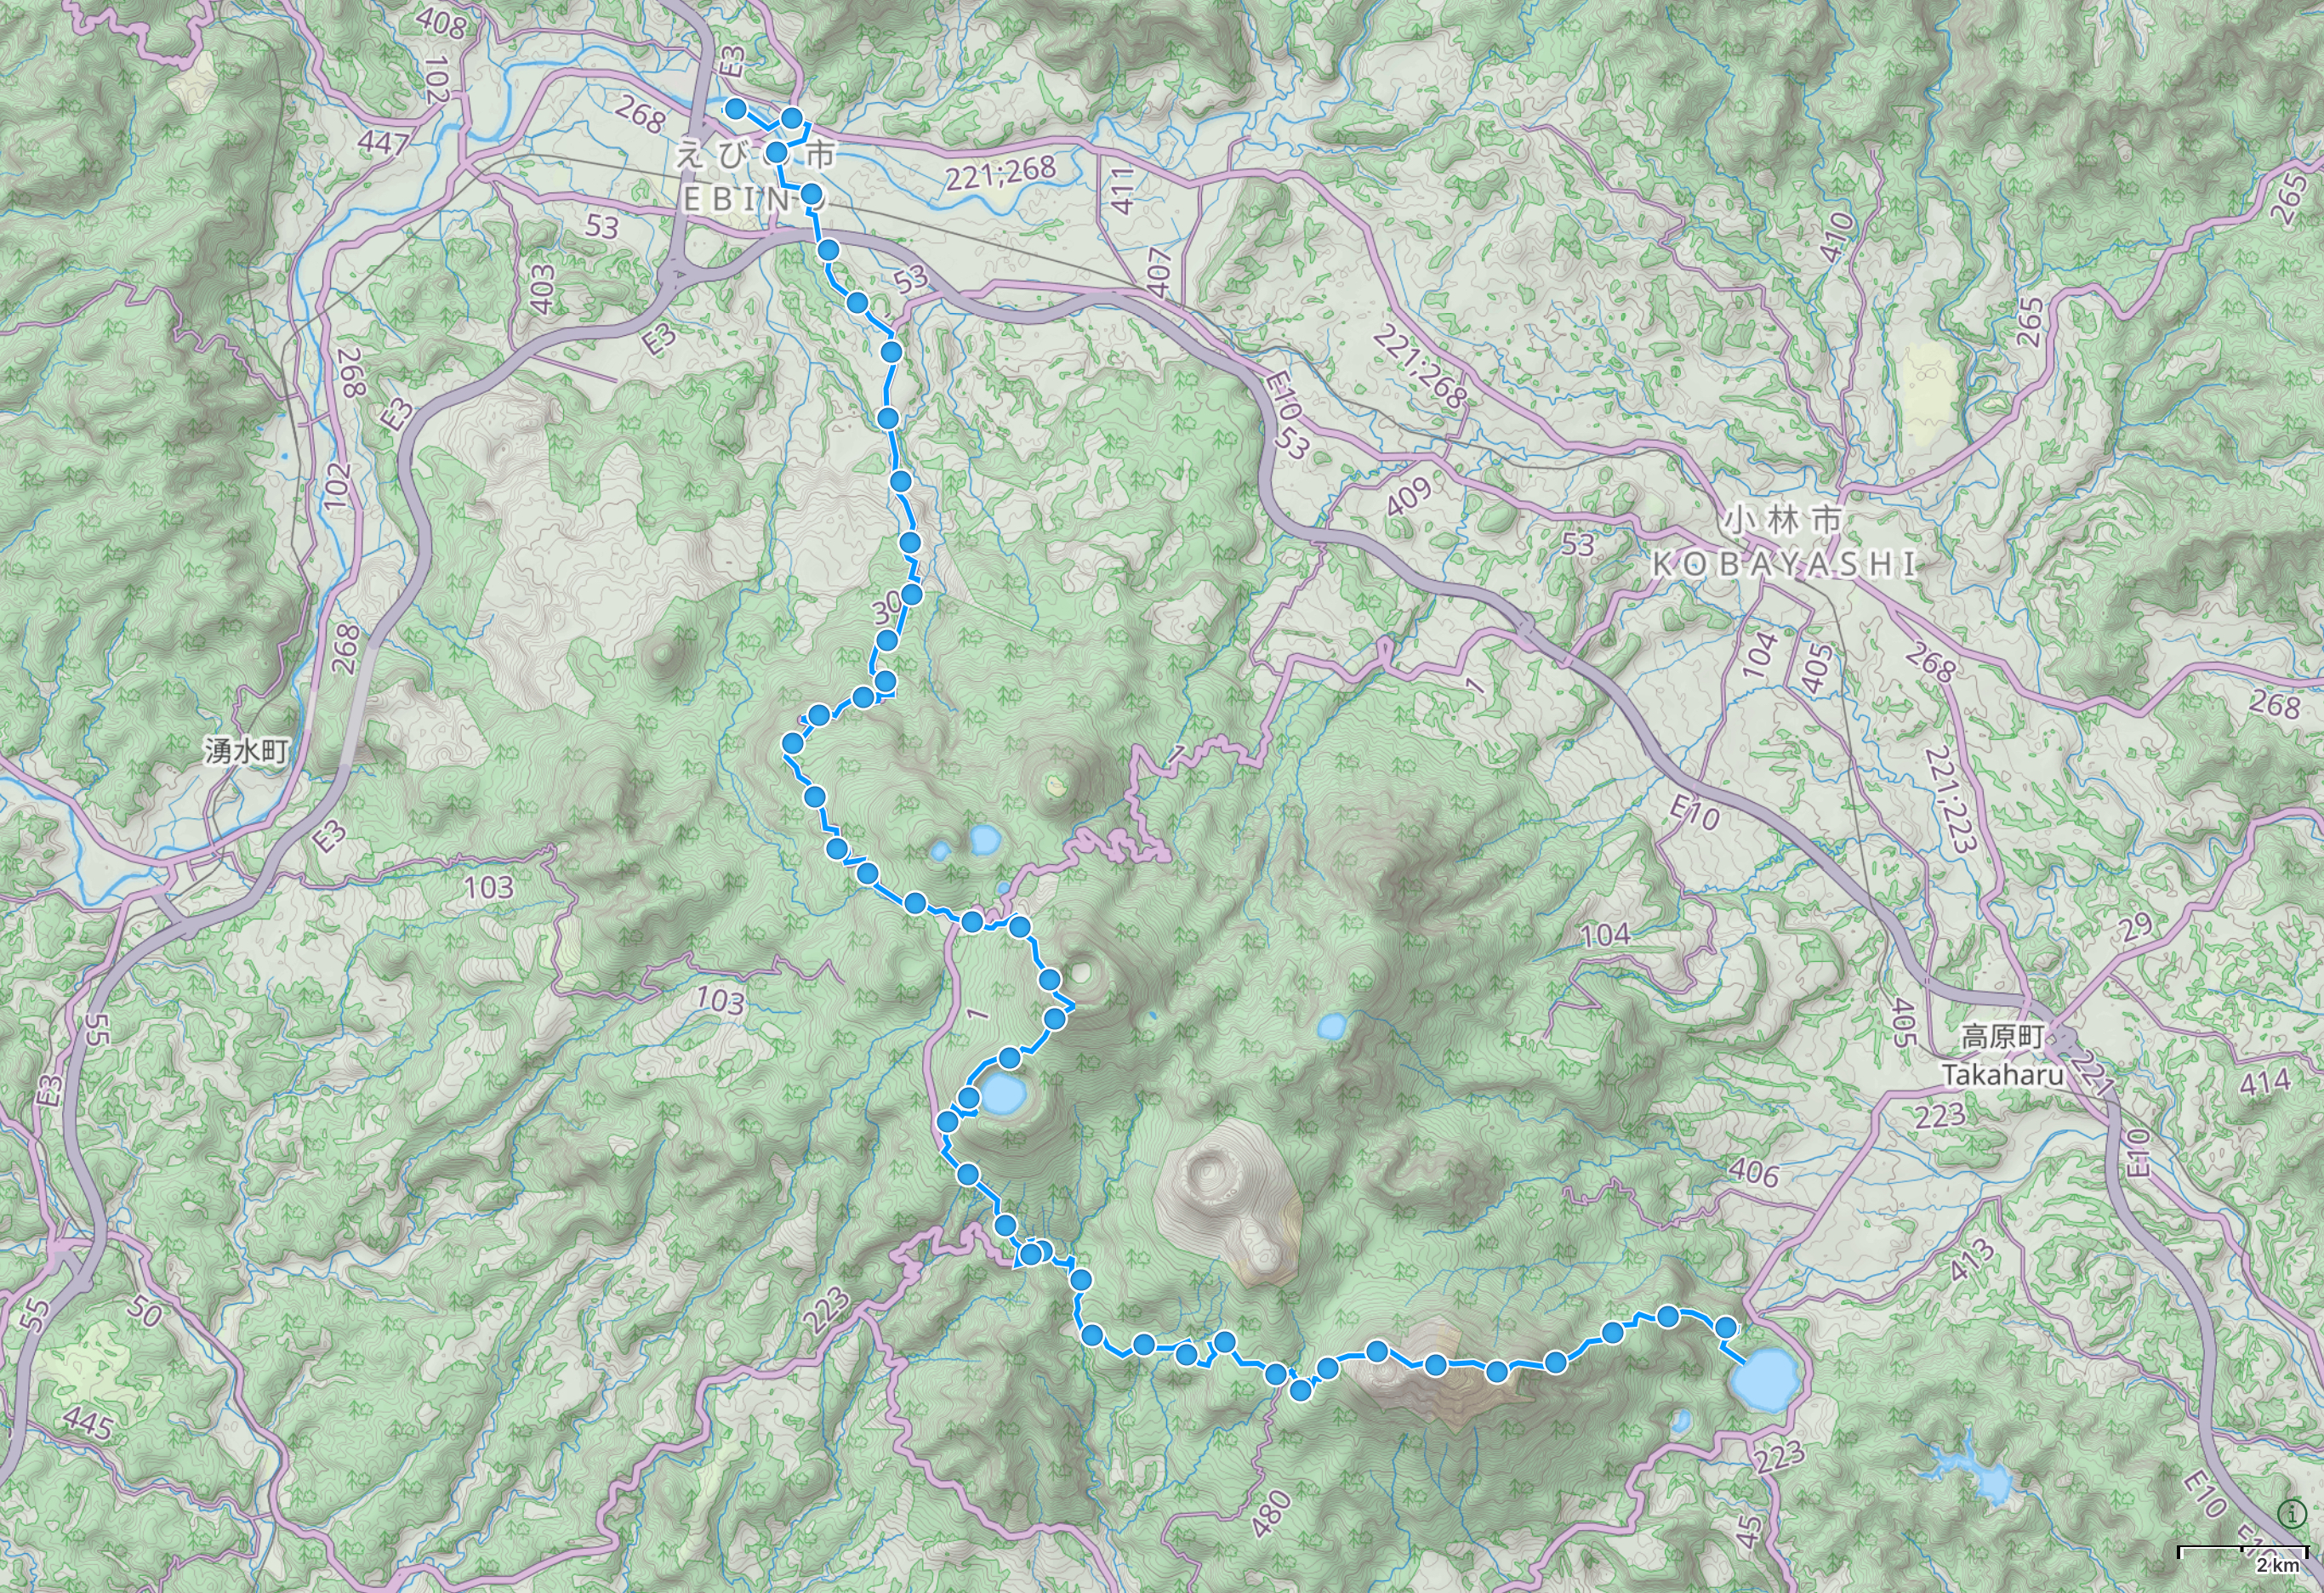 Map of the Kirishima Mountains with author’s route from Lake Miike to Kakutō highlighted.